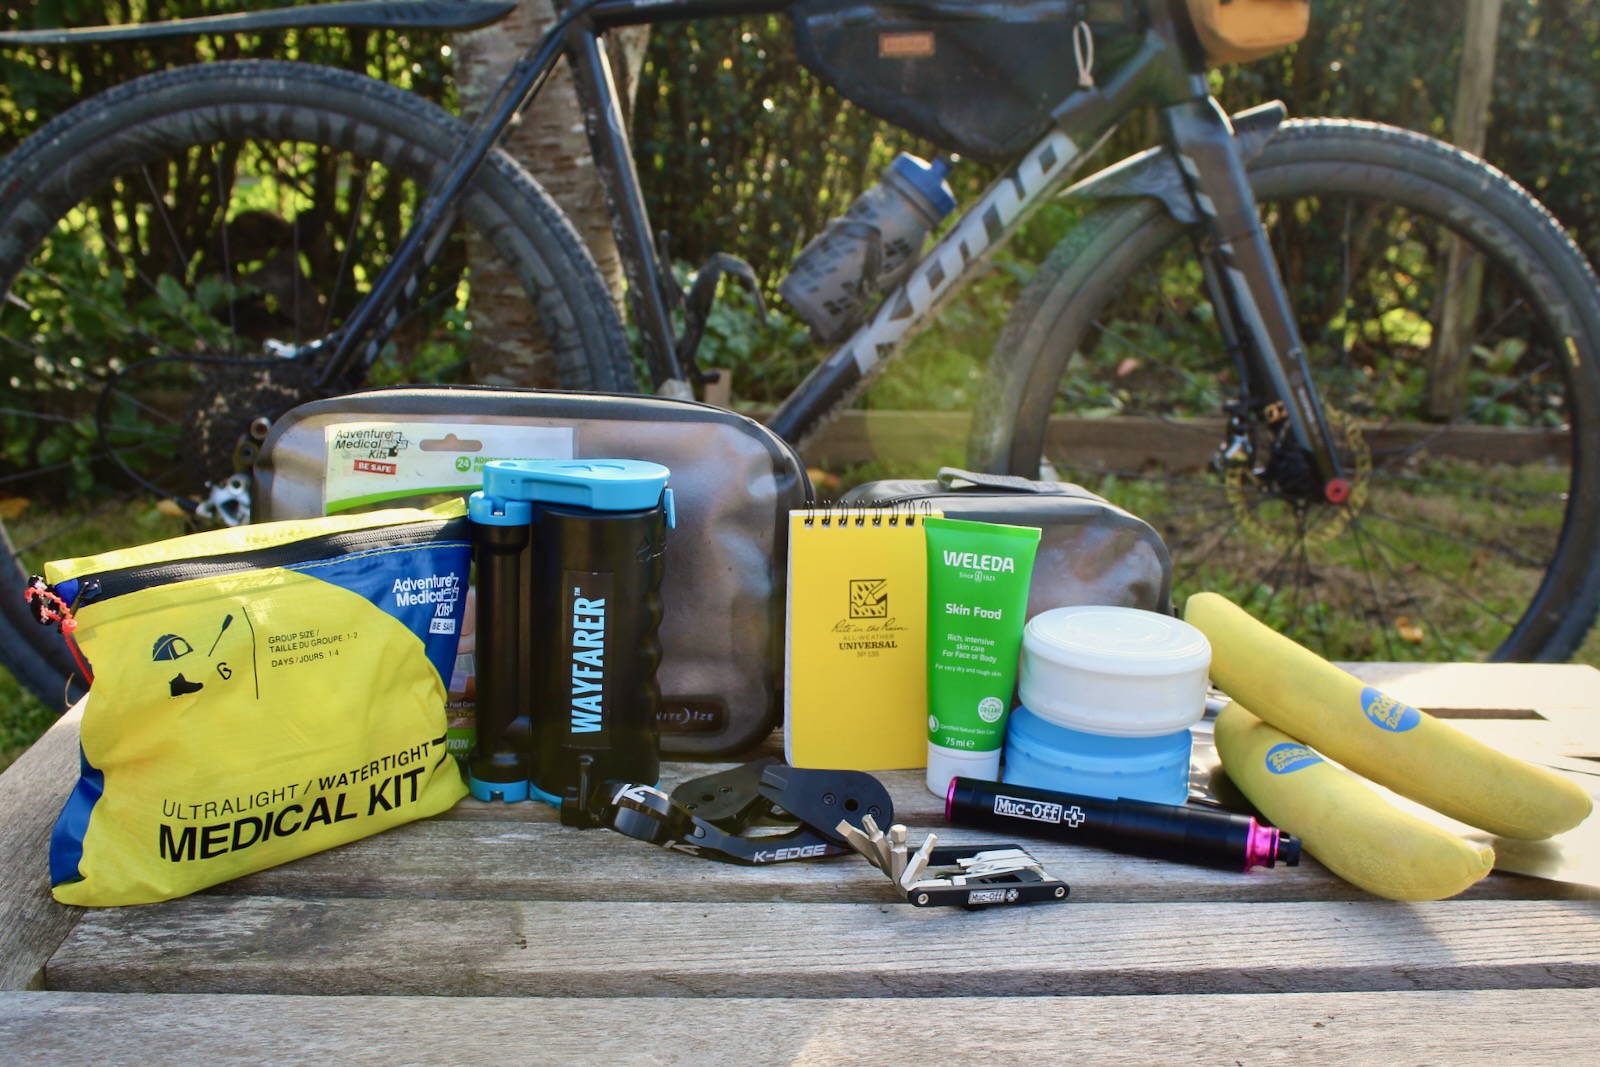 5 Best Sugru Hacks and Fixes for Cyclists